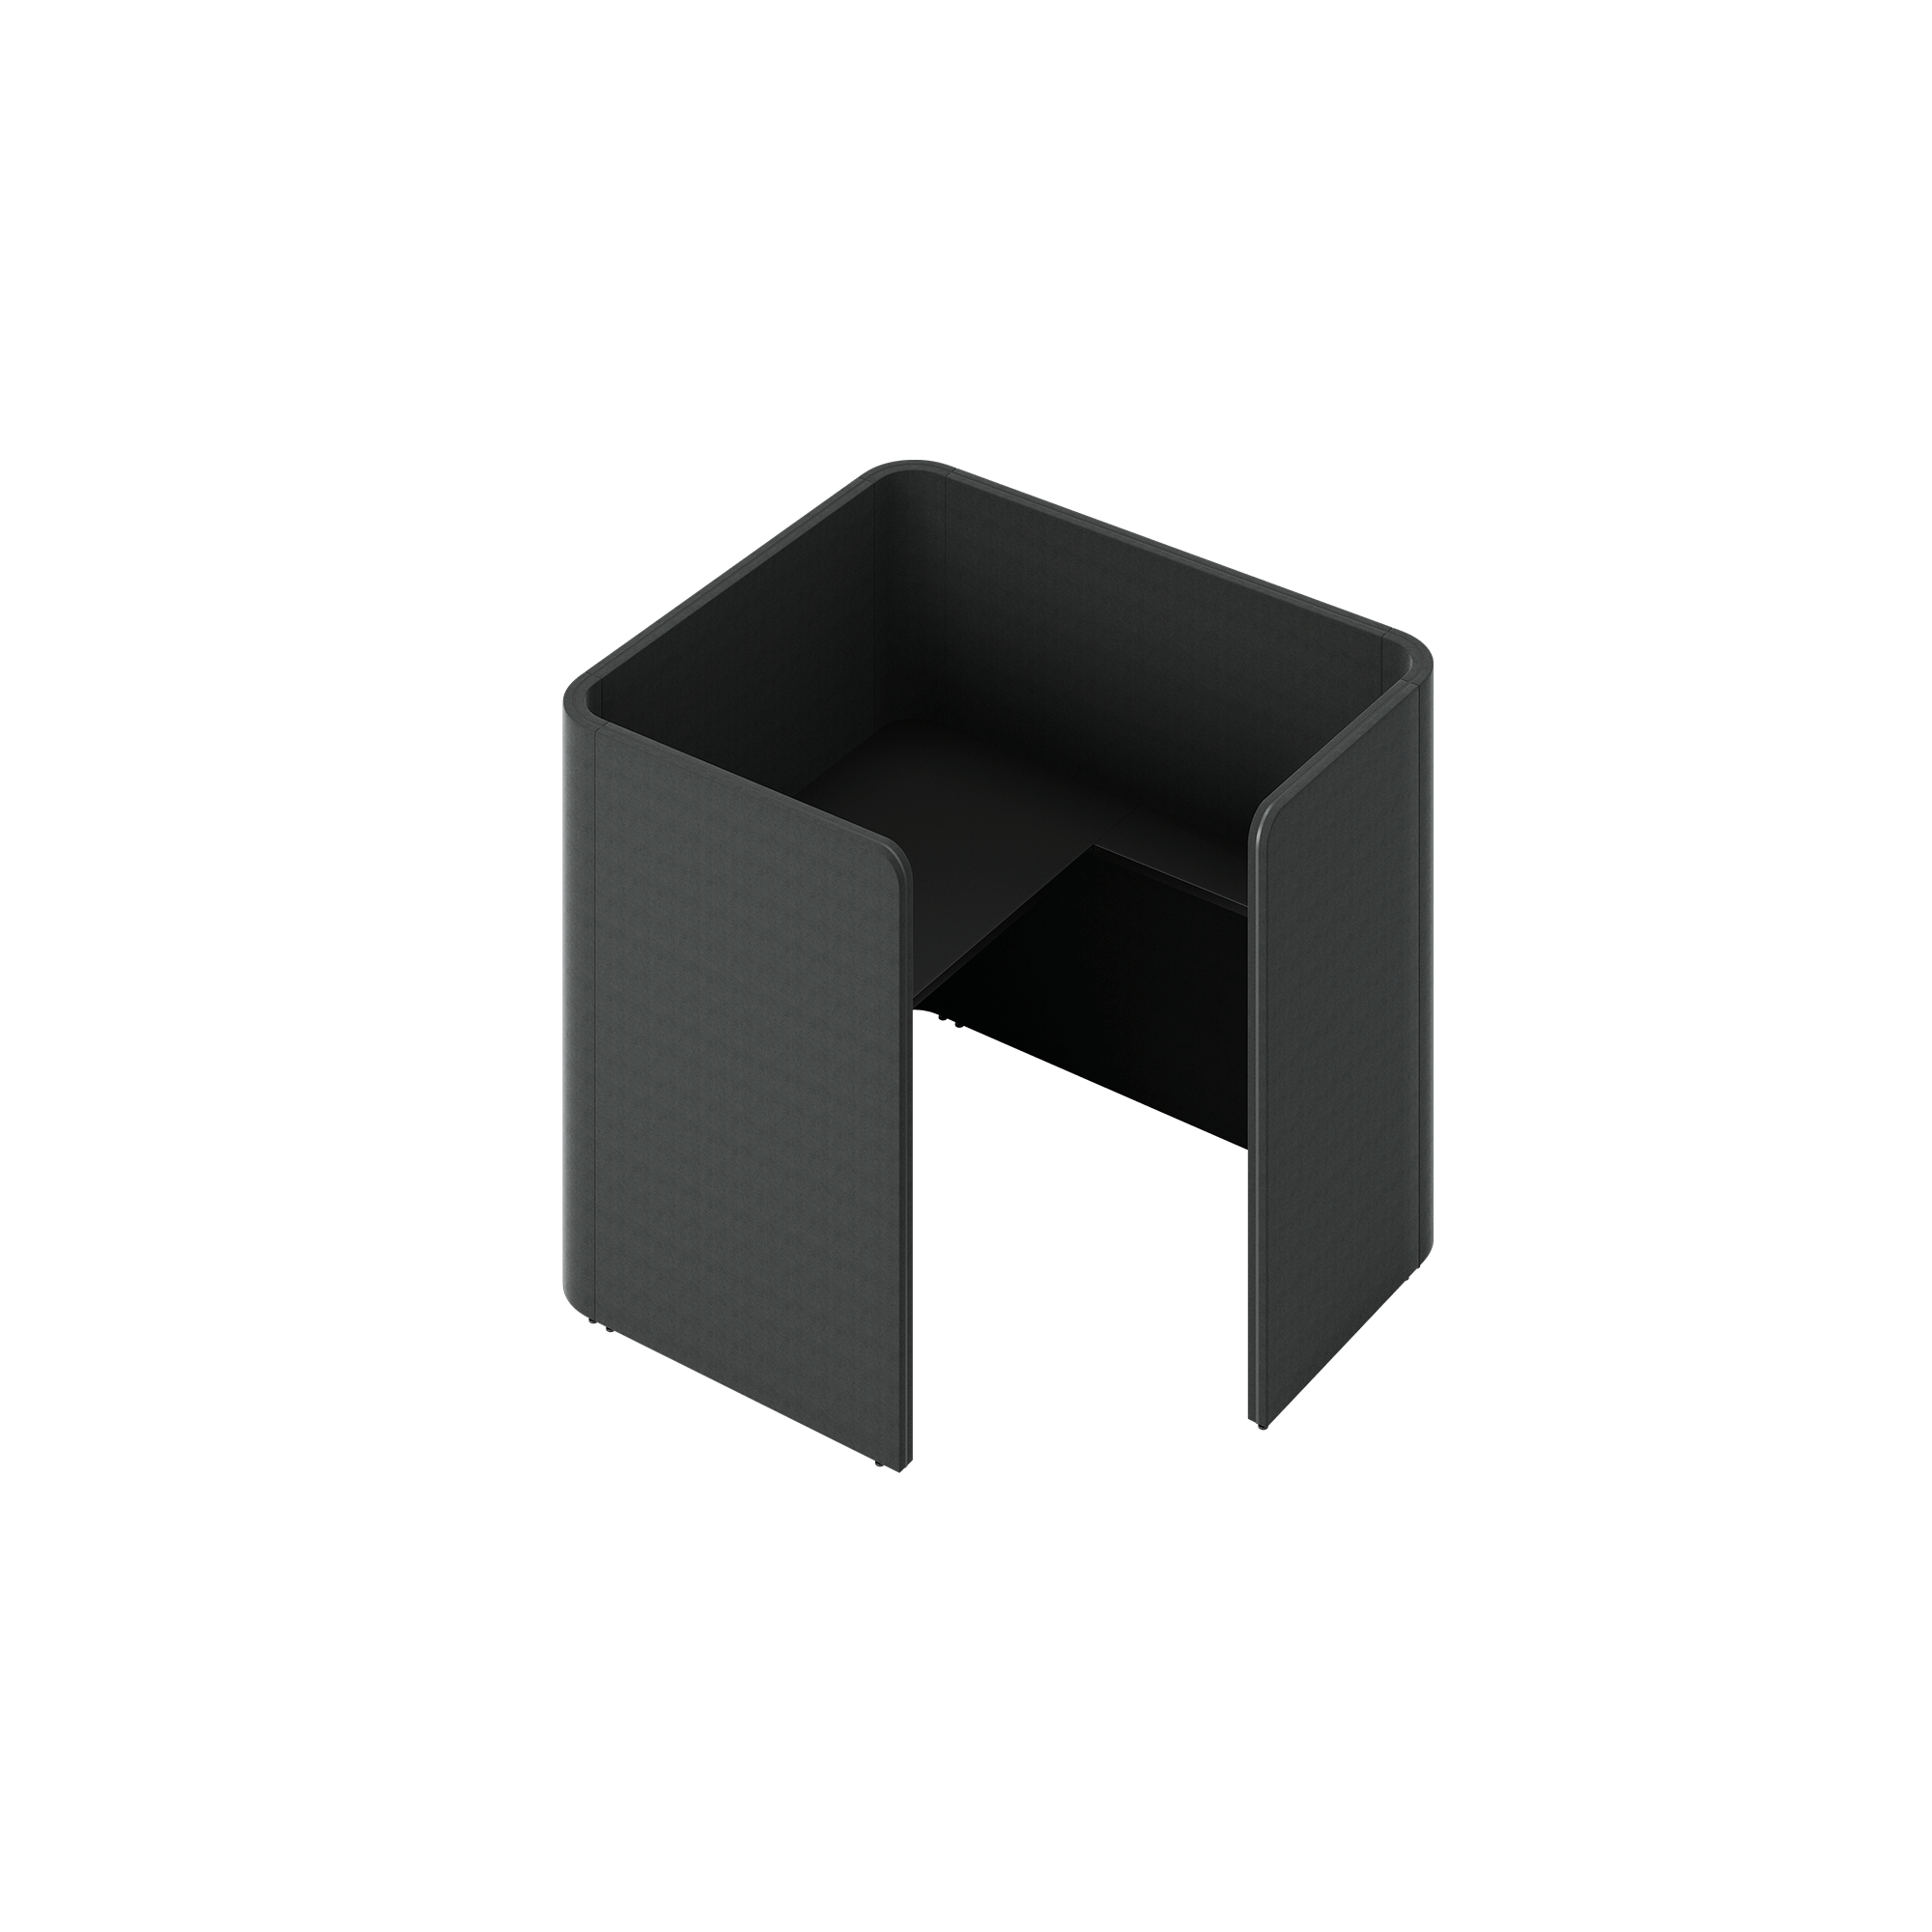 A black study booth with one compartment